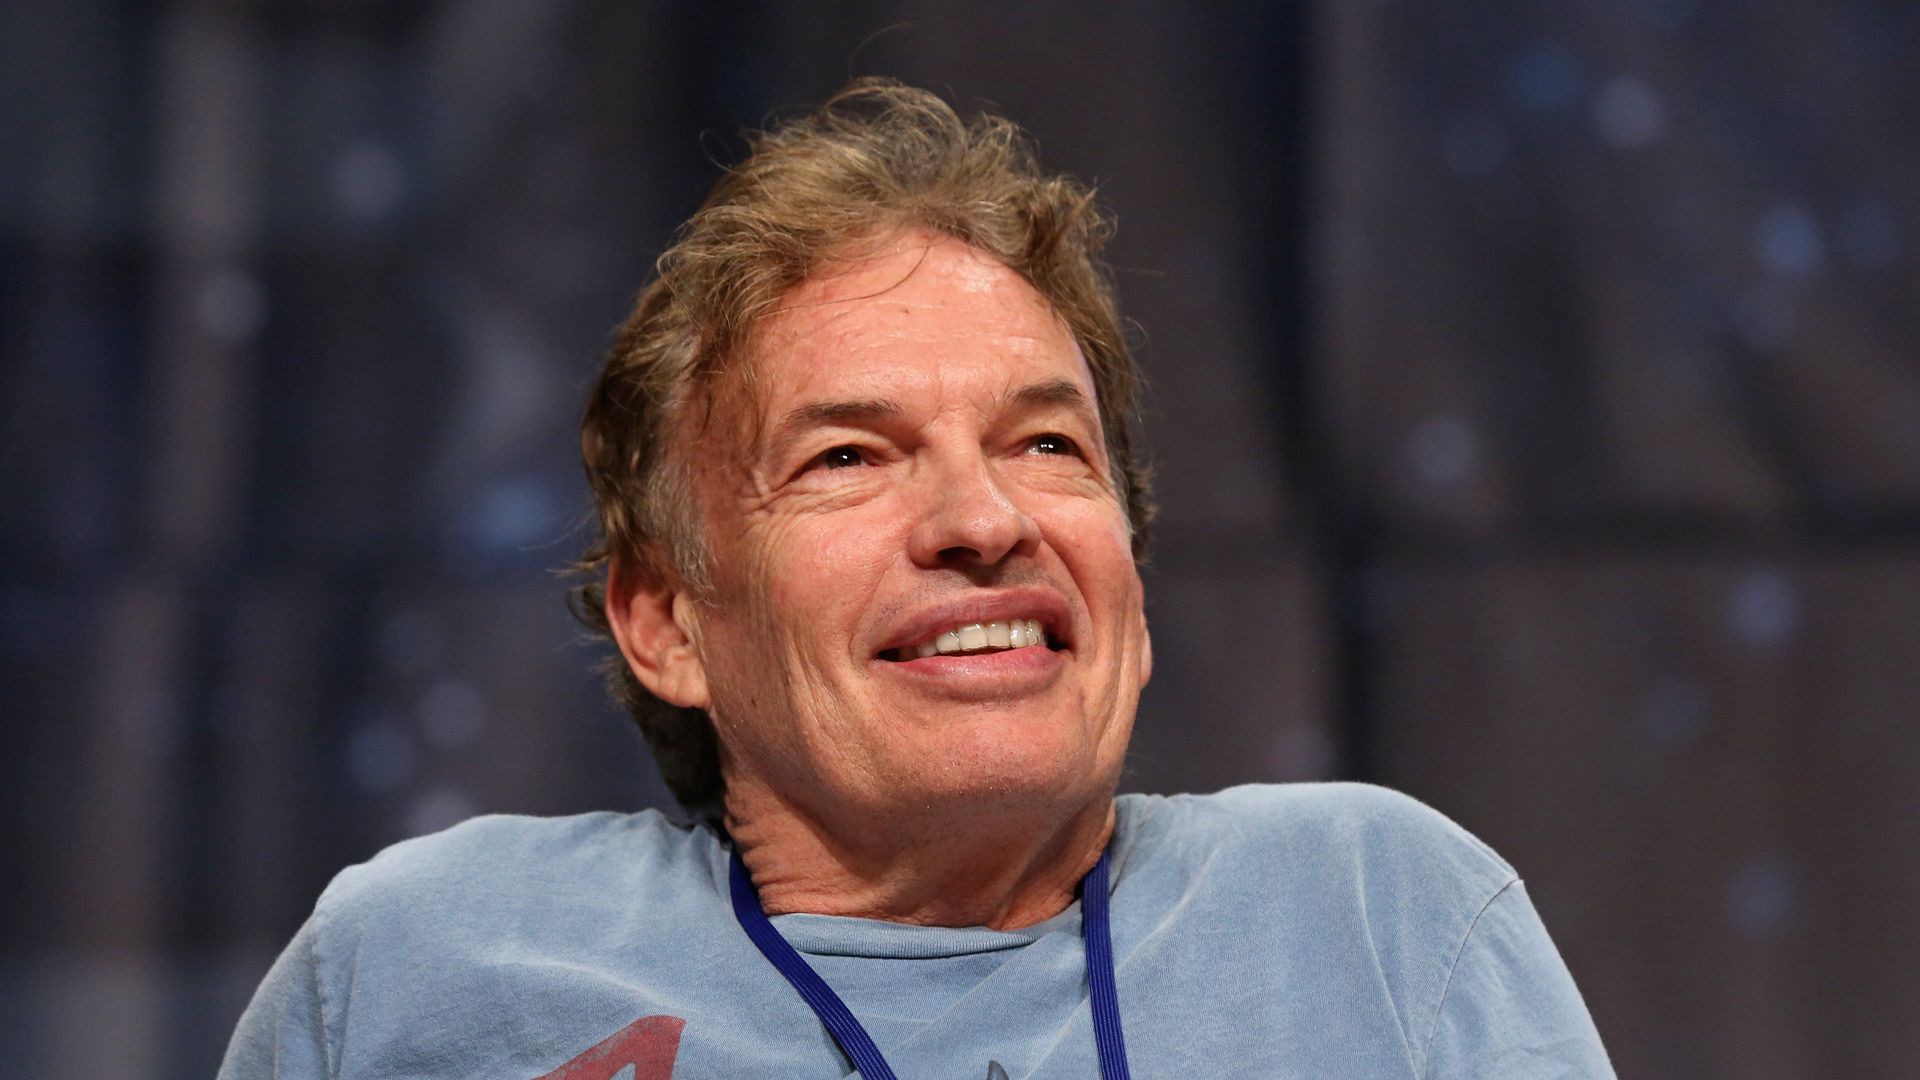 Actor Gary Graham speaks during the "A Look at Enterprise" panel at the 15th annual official Star Trek convention at the Rio Hotel & Casino on August 3, 2016 in Las Vegas, Nevada.